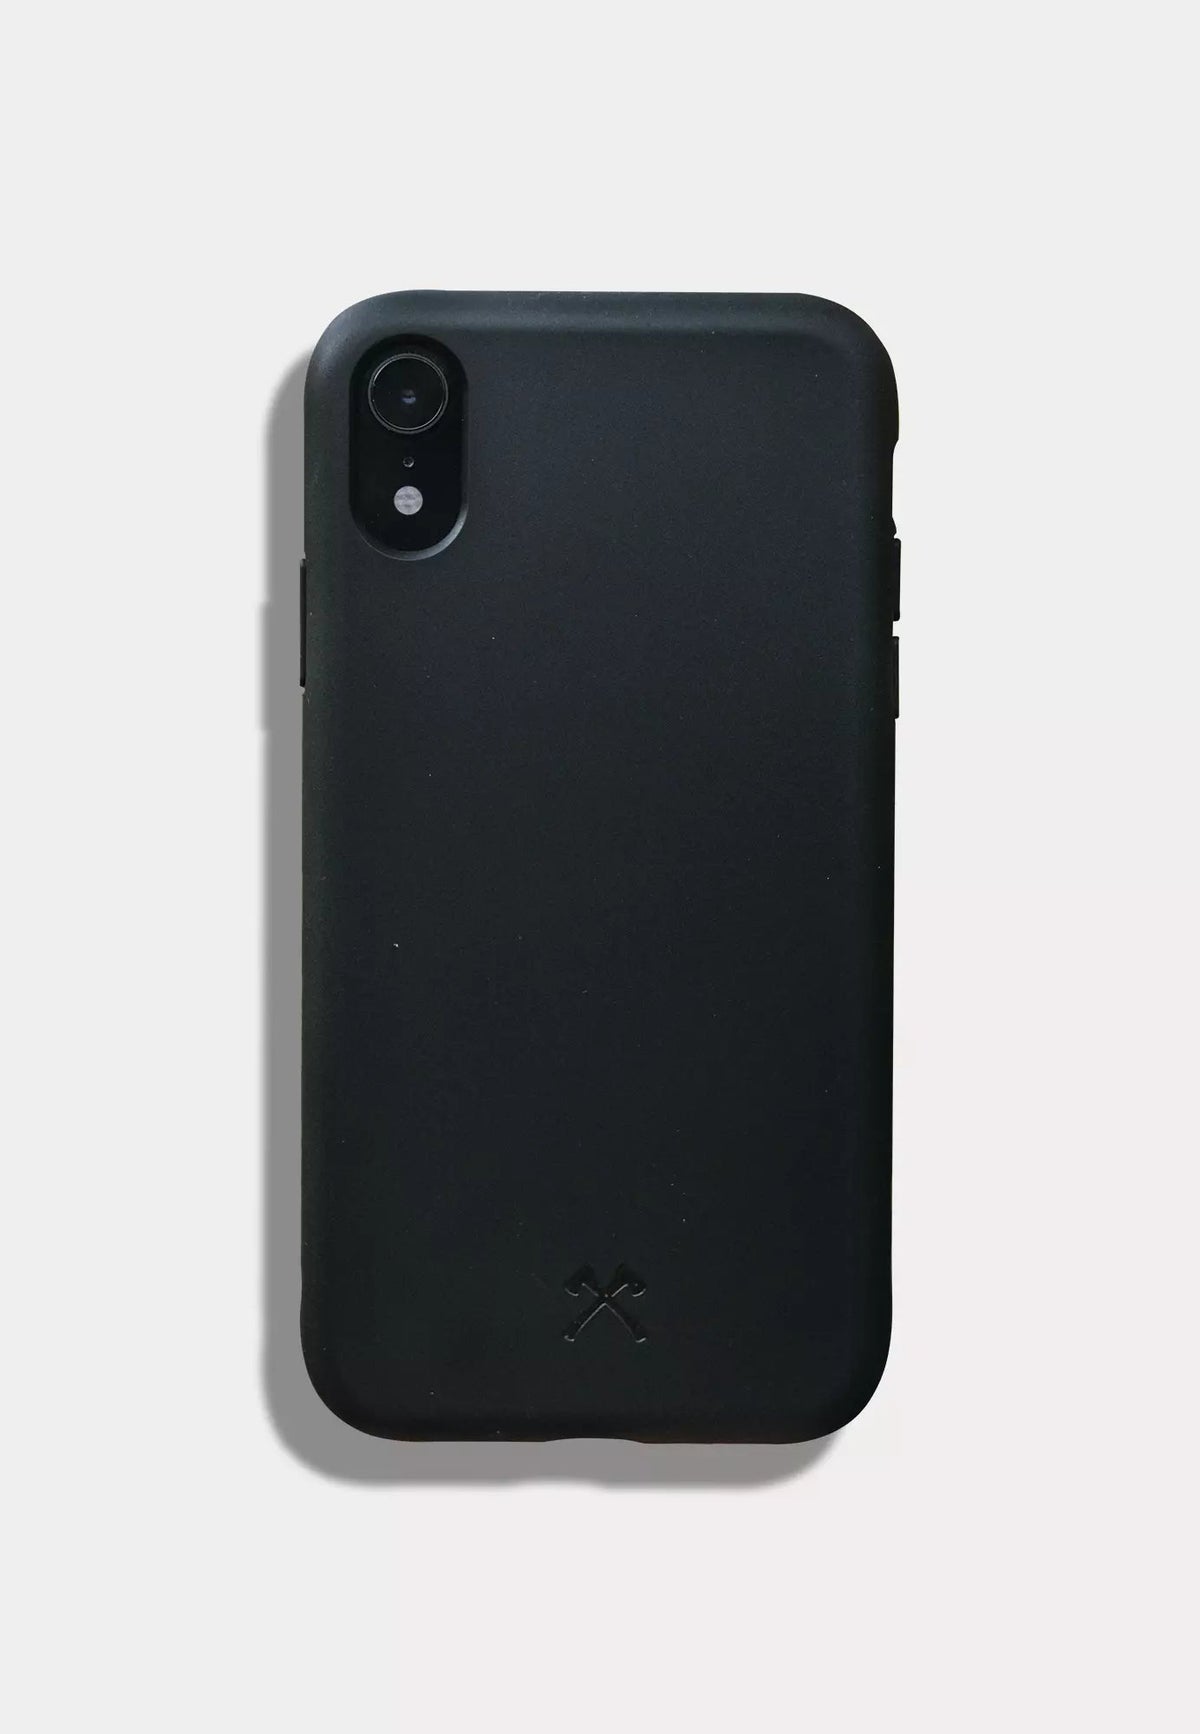 Antibacterial iPhone case made from organic material